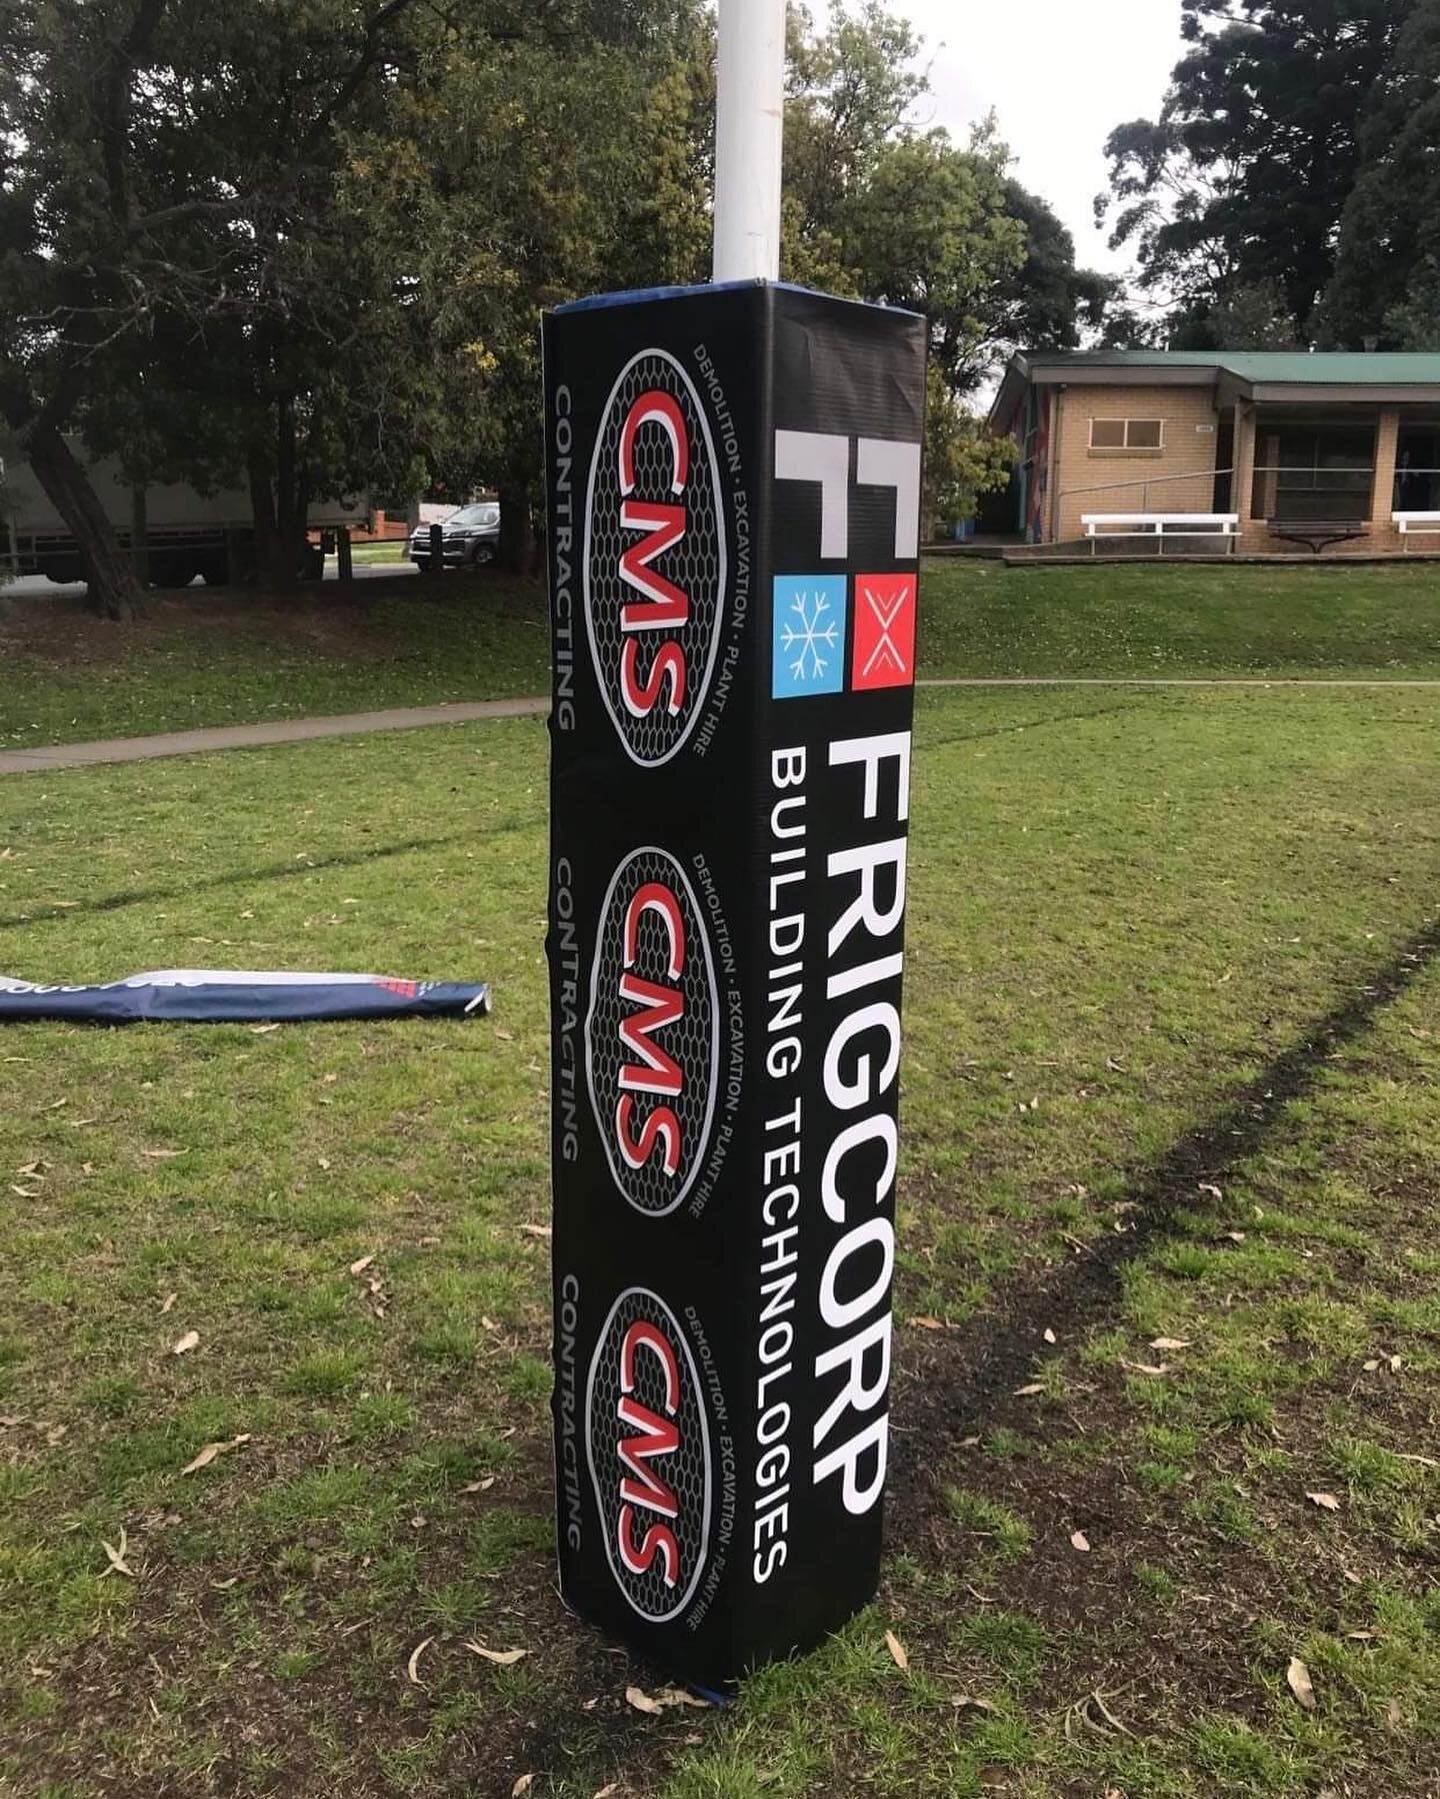 Post protectors looking shmick, just in time for Ryde Rugby&rsquo;s Grand Final Weekend! 

All the best to all teams playing this weekend, it&rsquo;s been a pleasure supporting the club for another season! 

@rydejuniorrugby 
@frigcorp_official